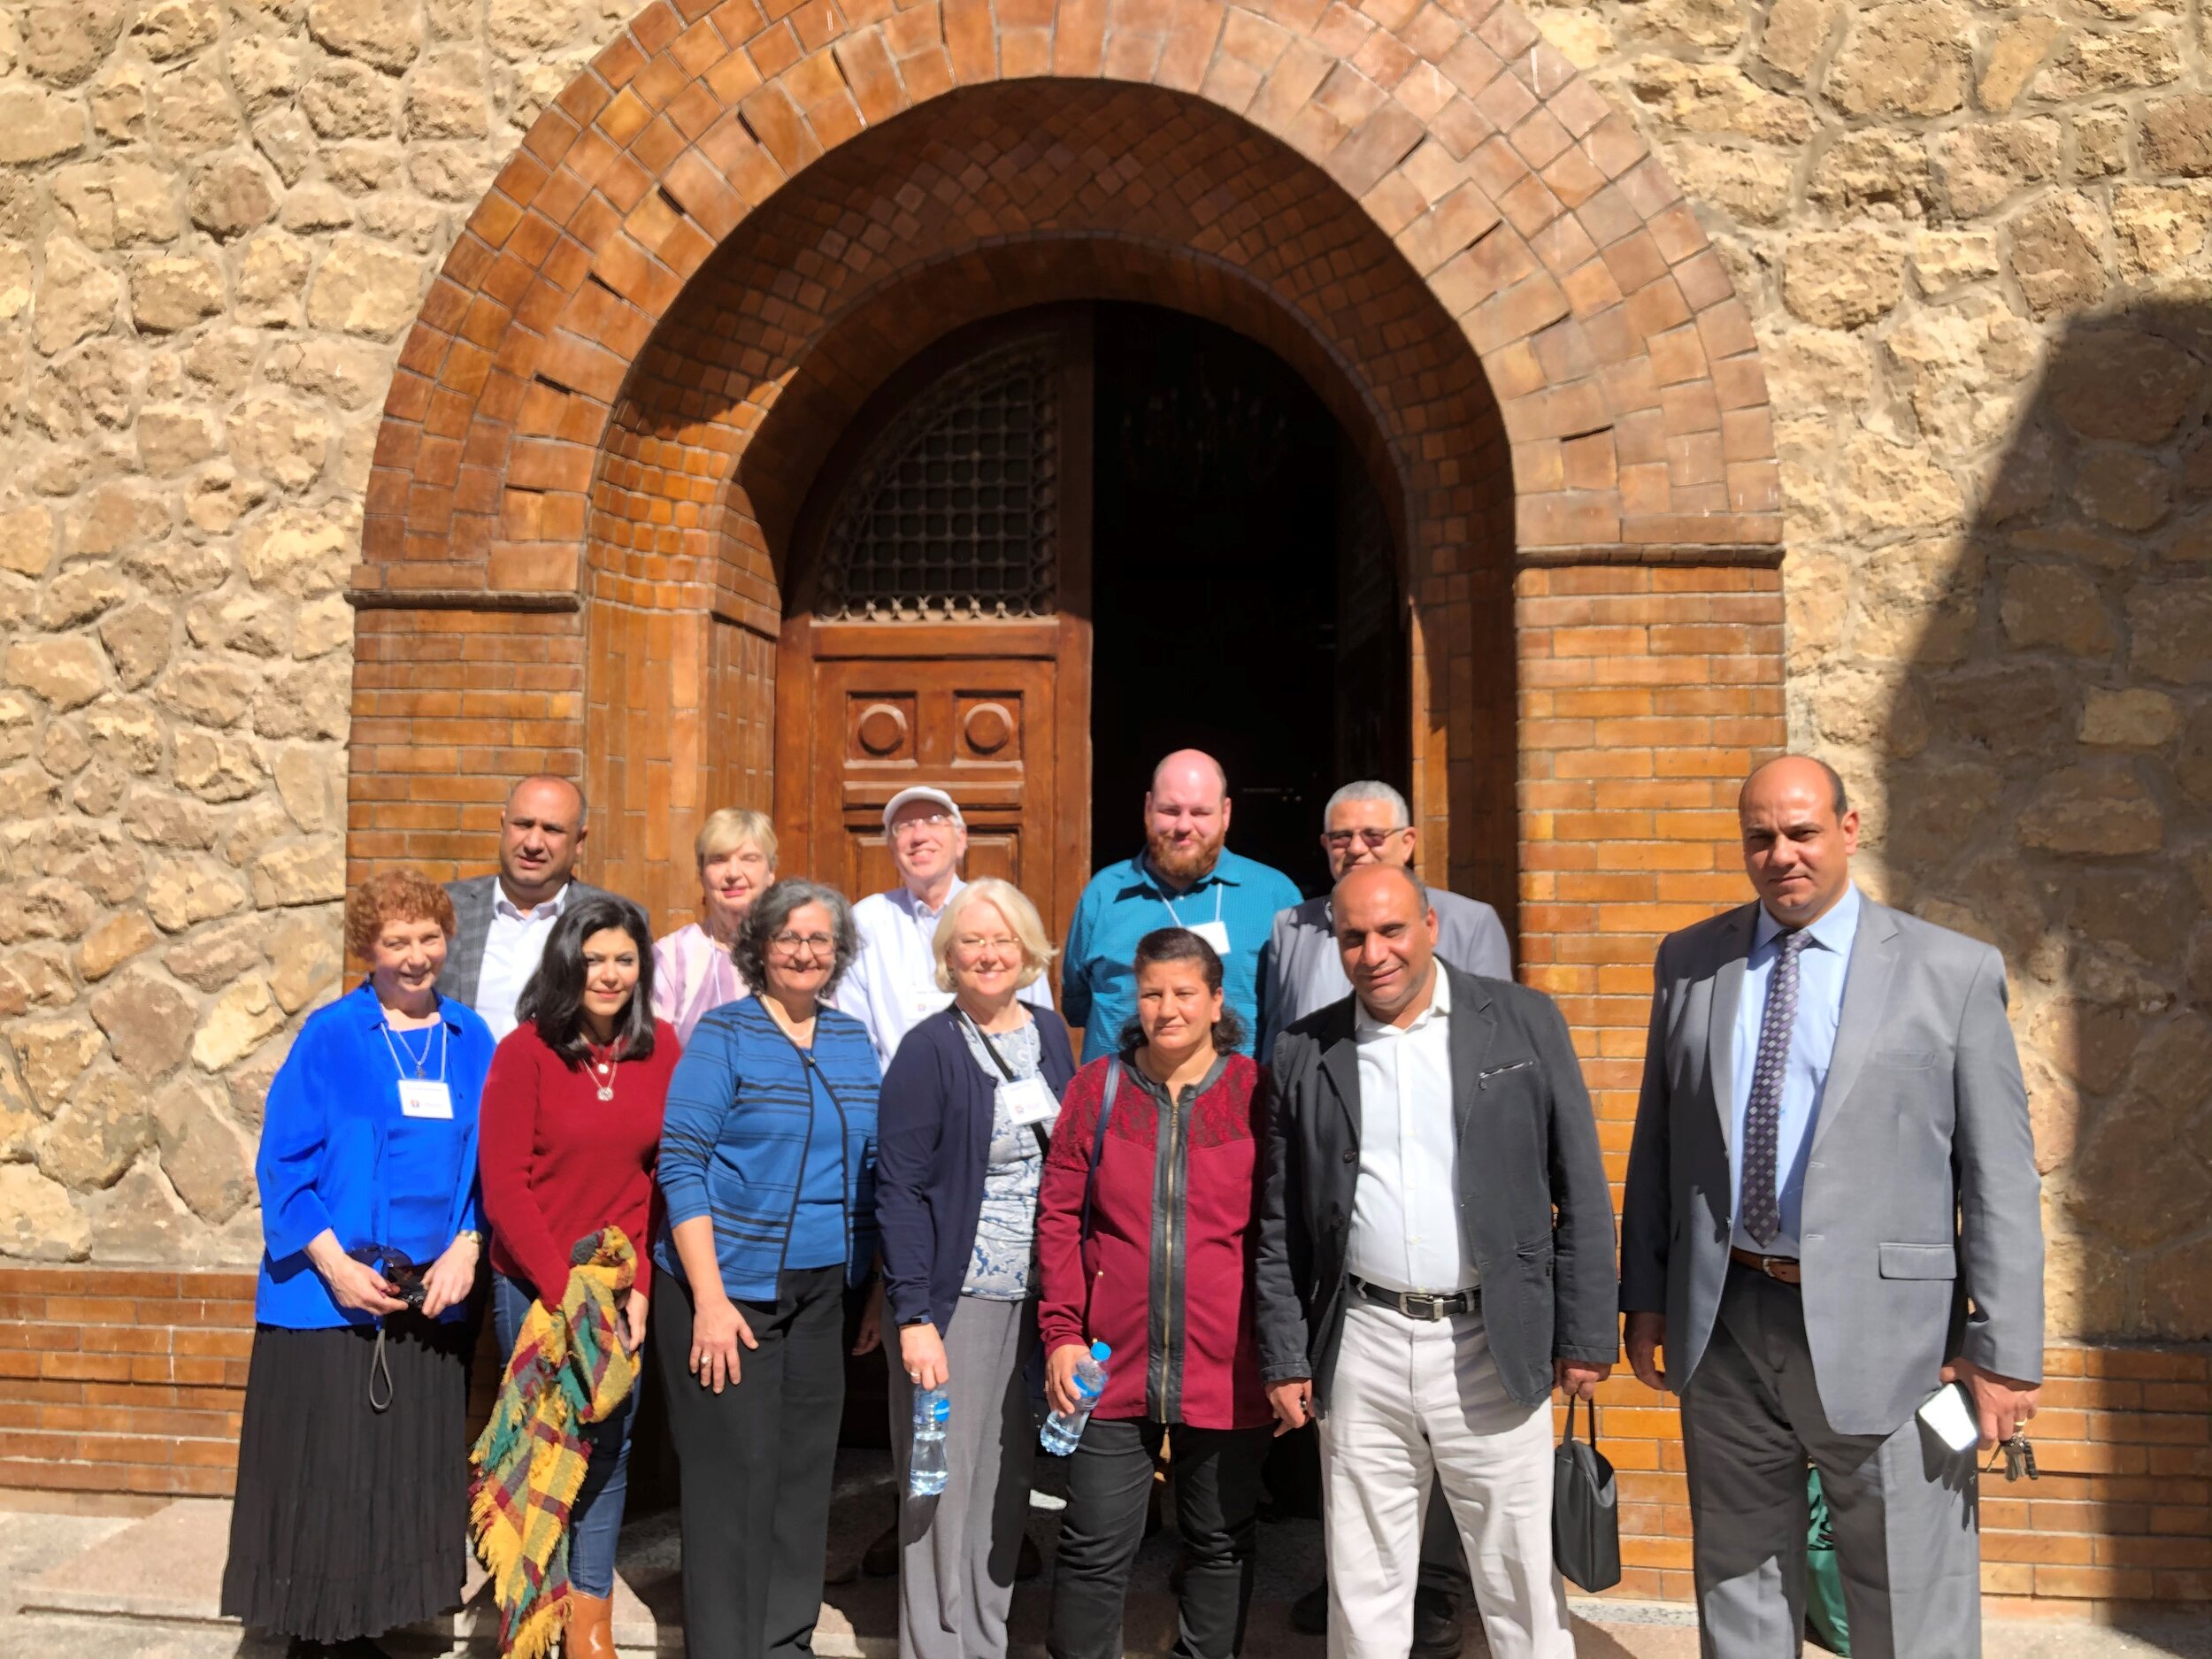  The team at Ismailia with church and synod hosts and translators. (It is not possible for foreigners to visit the new church plants.)  